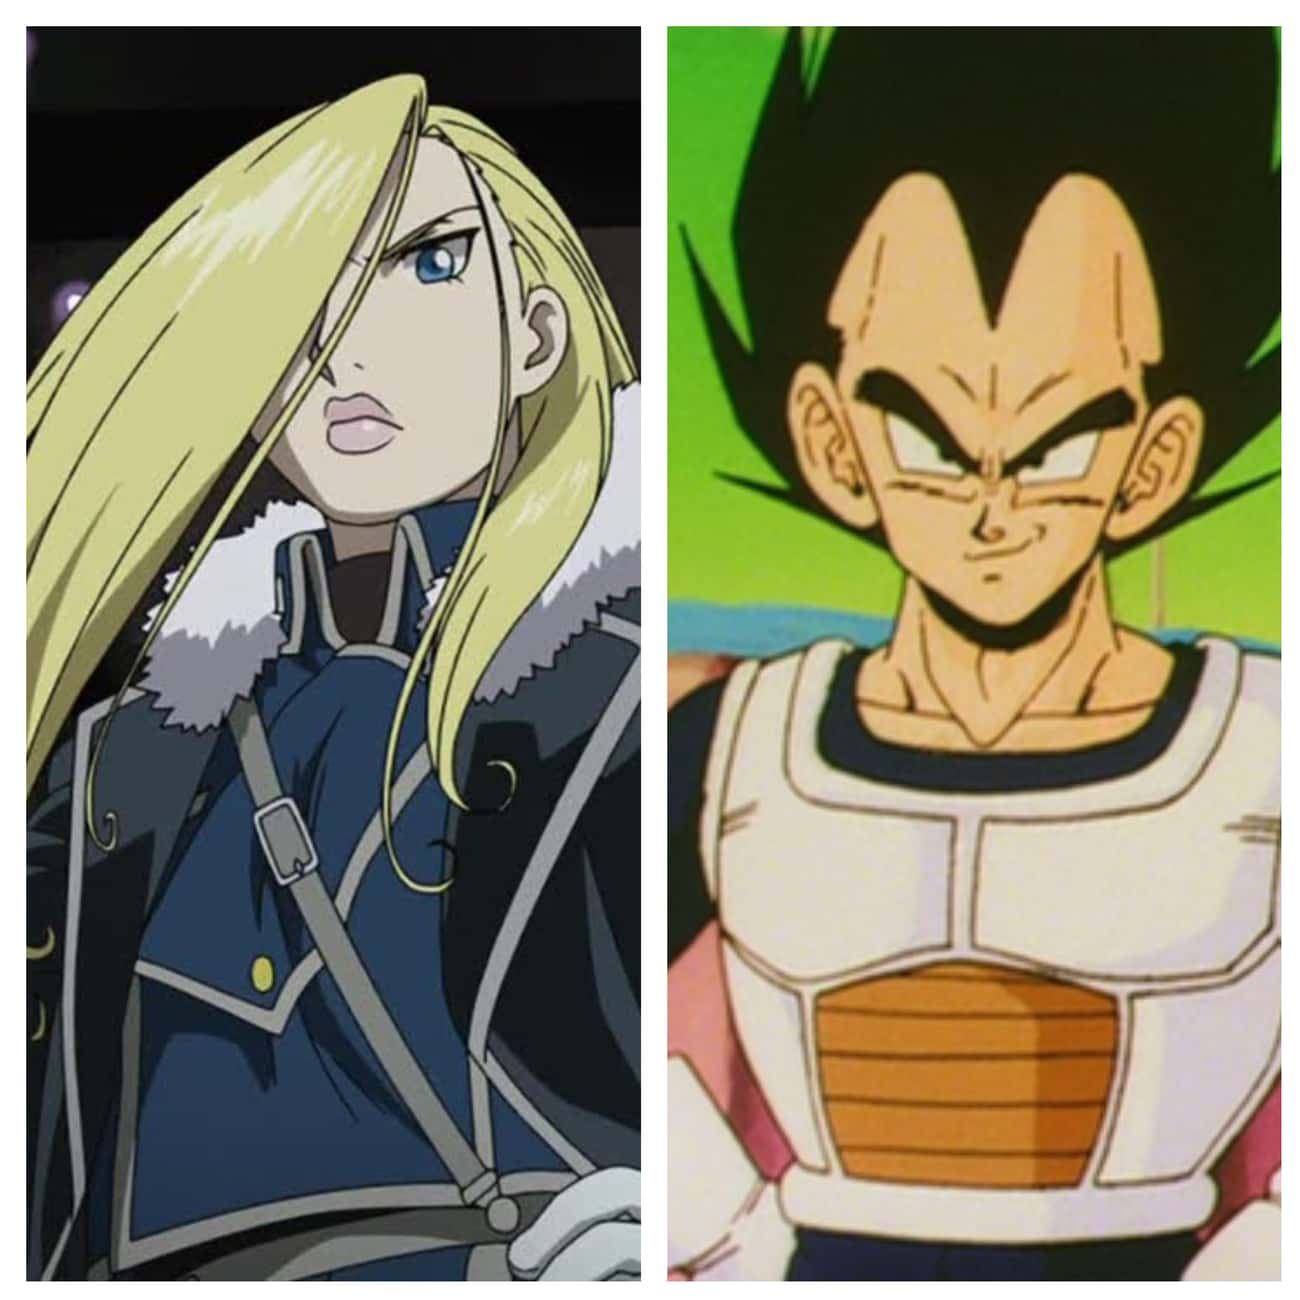 Olivier Mira Armstrong From &#39;Fullmetal Alchemist: Brotherhood&#39; And Vegeta From &#39;DBZ&#39;